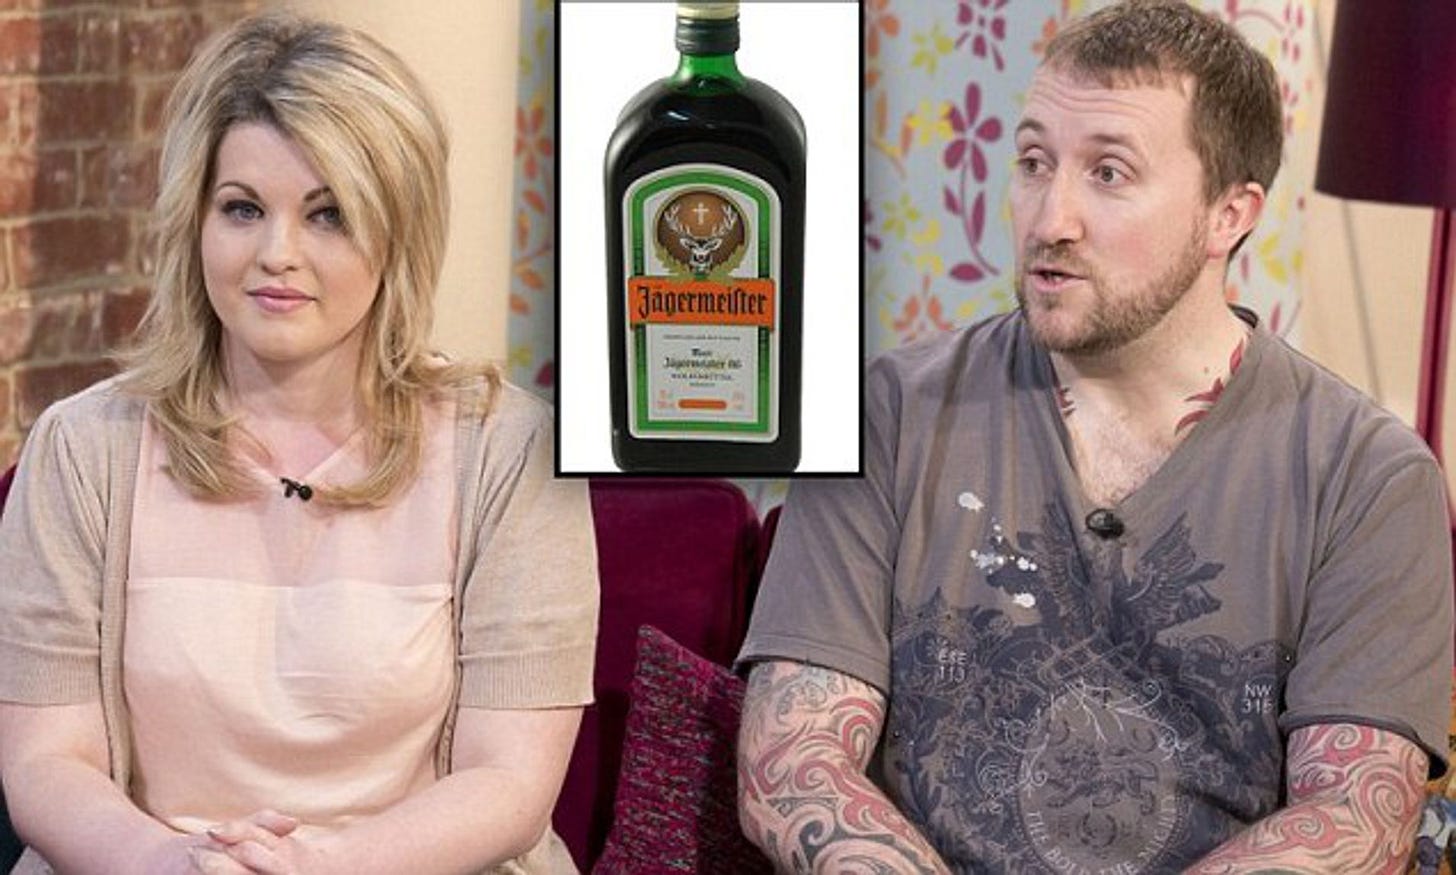 I only had FOUR shots!' Jagerbomb teen had THREE heart attacks after  drinking Jagermeister mixed with energy drink | Daily Mail Online